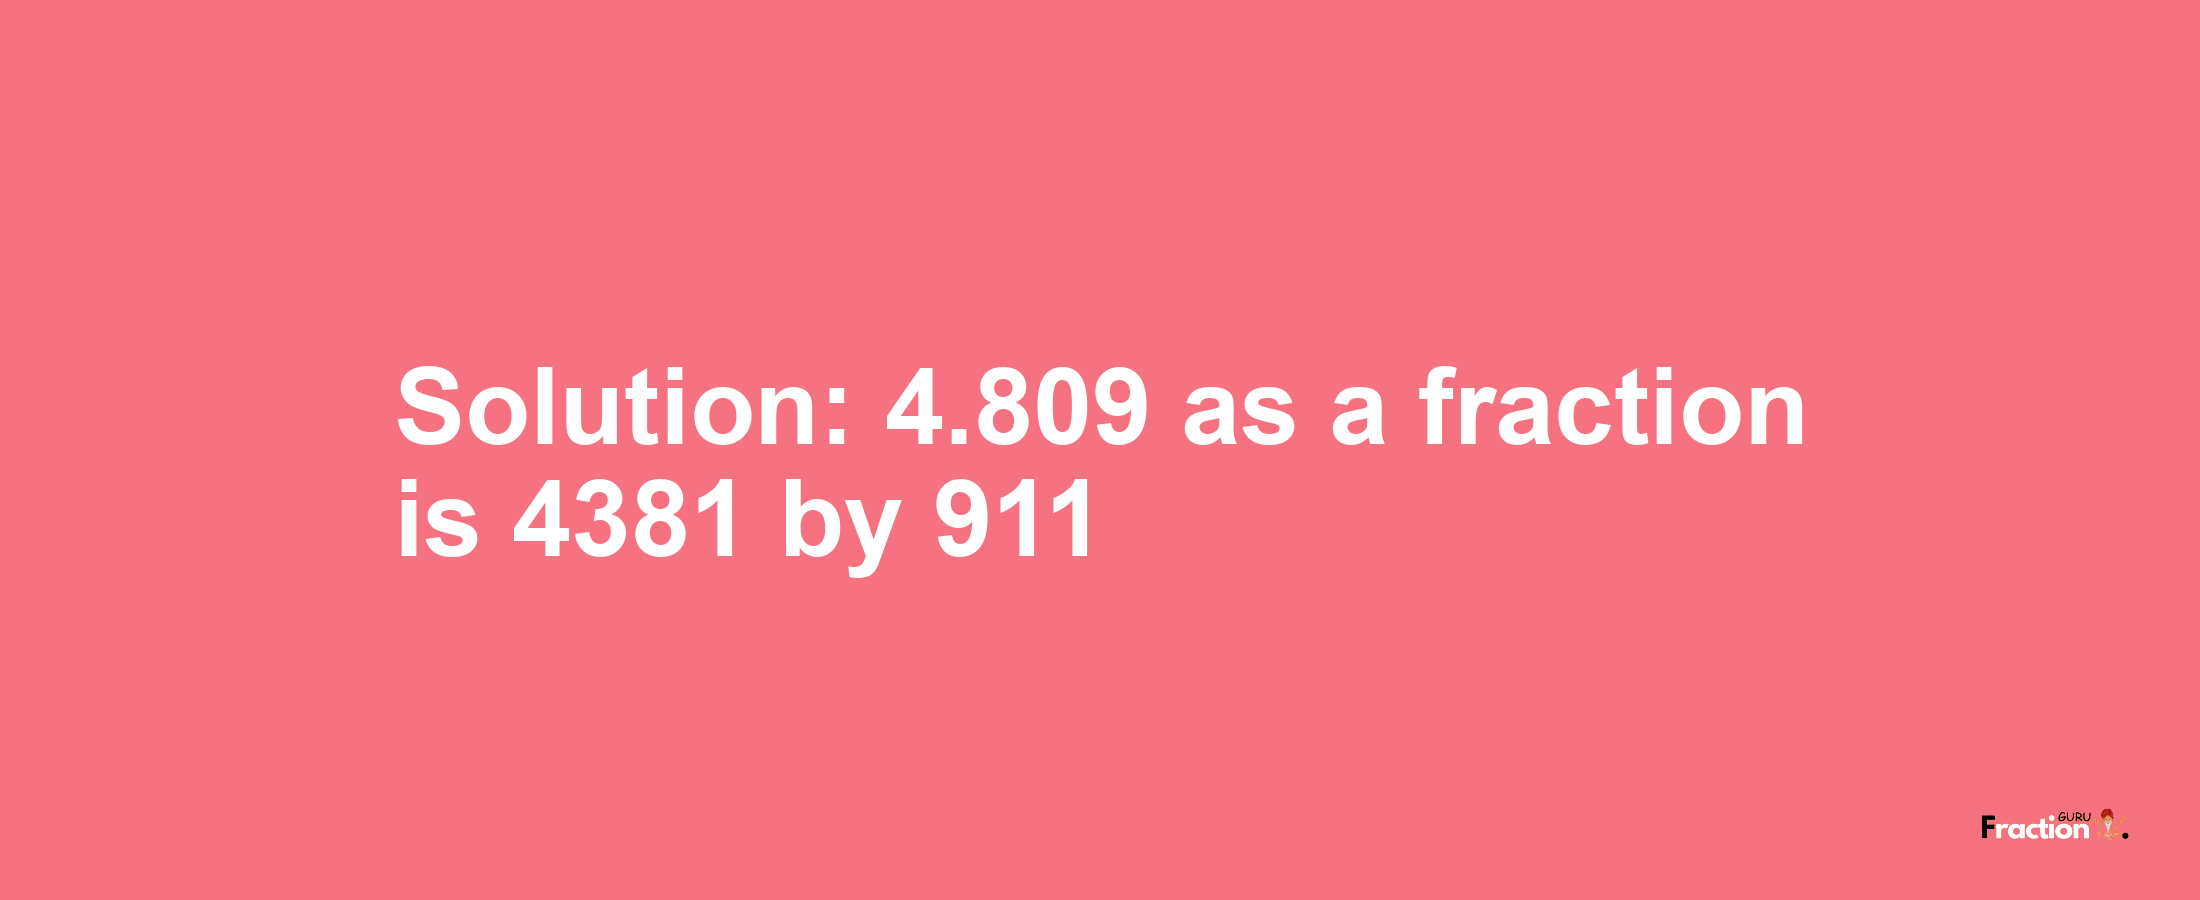 Solution:4.809 as a fraction is 4381/911